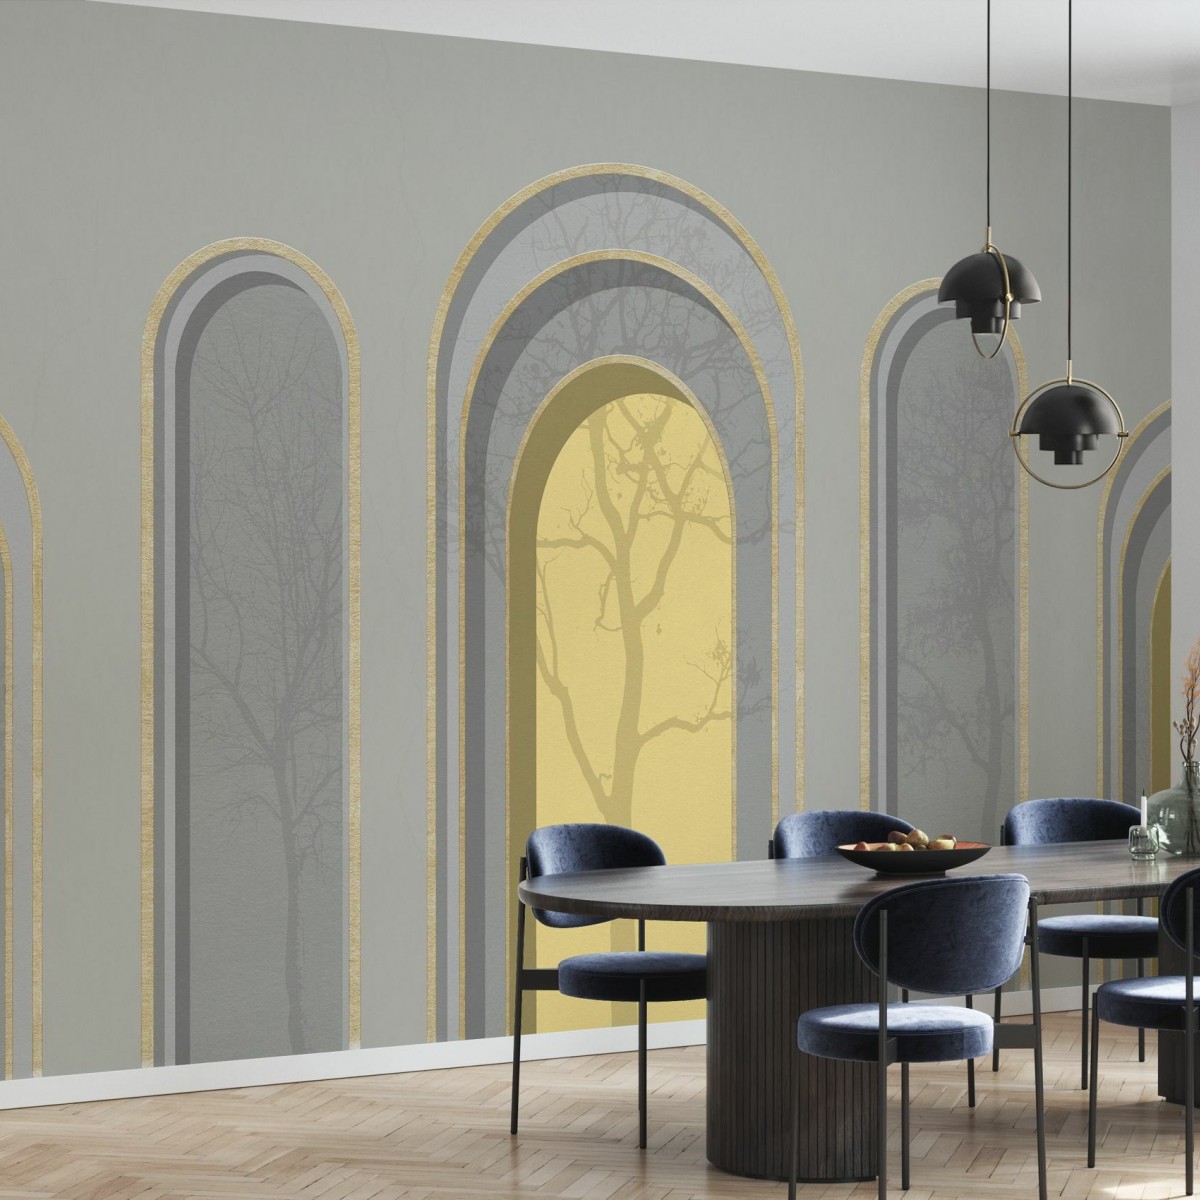 Fototapet Arch Adornment with Trees, Gray Yellow, Personalizat, Photowall, Fototapet living 